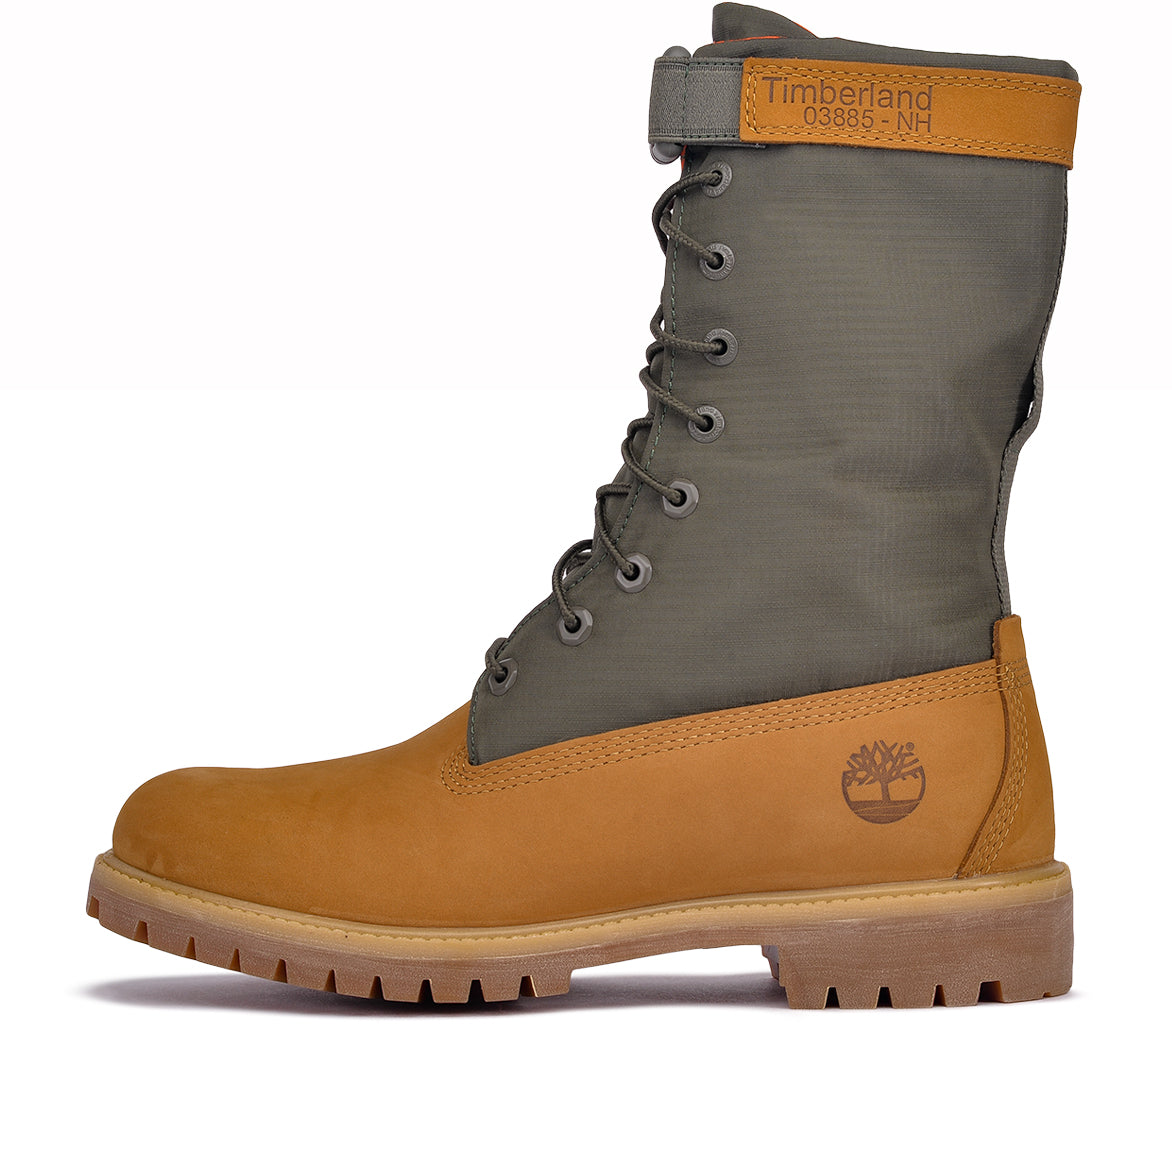 SPECIAL RELEASE 6" MIXED MEDIA GAITER BOOT - WHEAT / GREEN